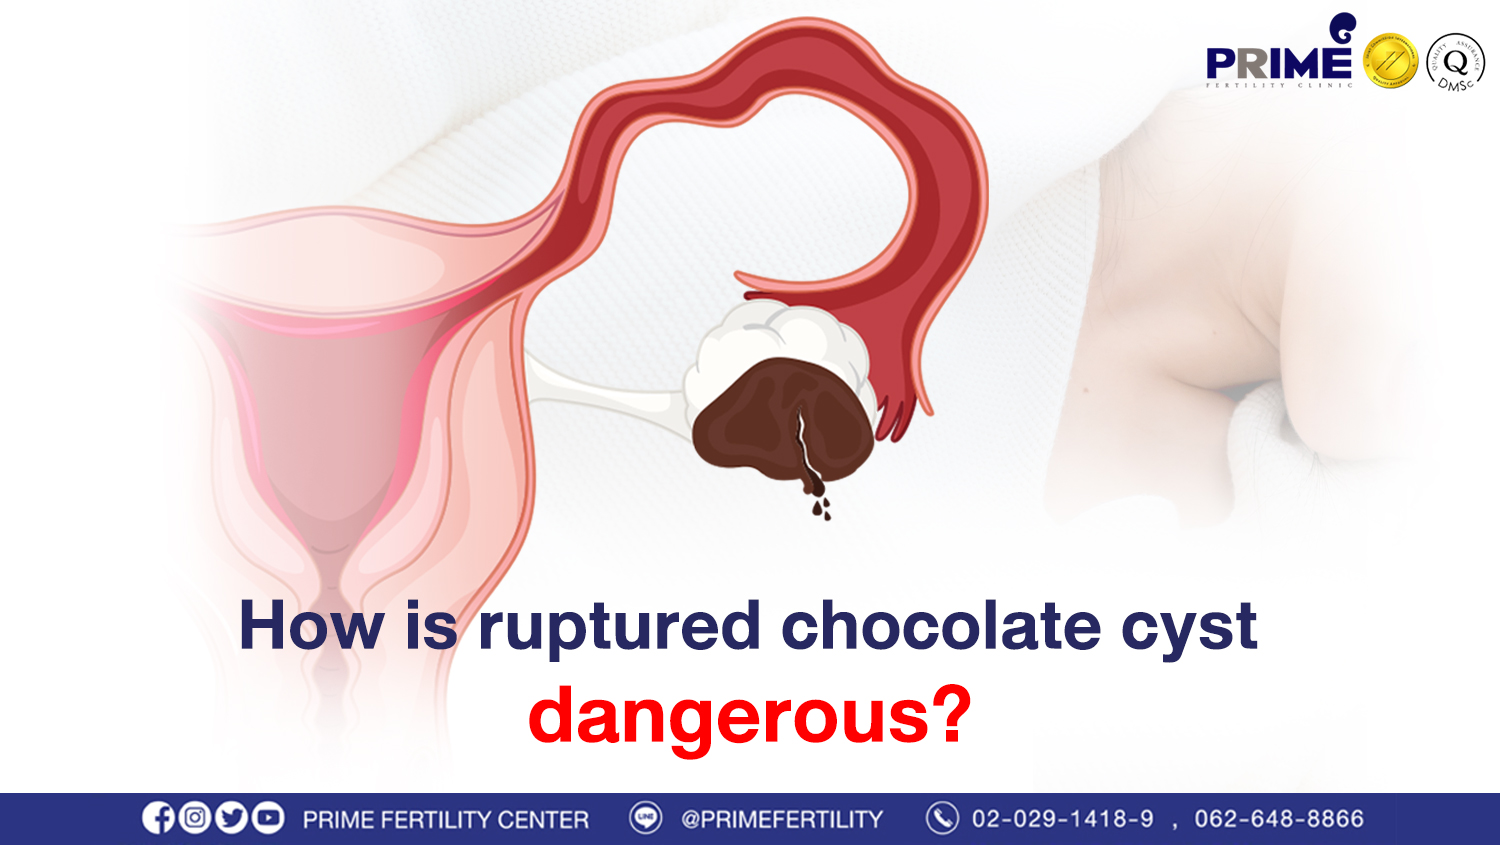 How is ruptured chocolate cyst dangerous?